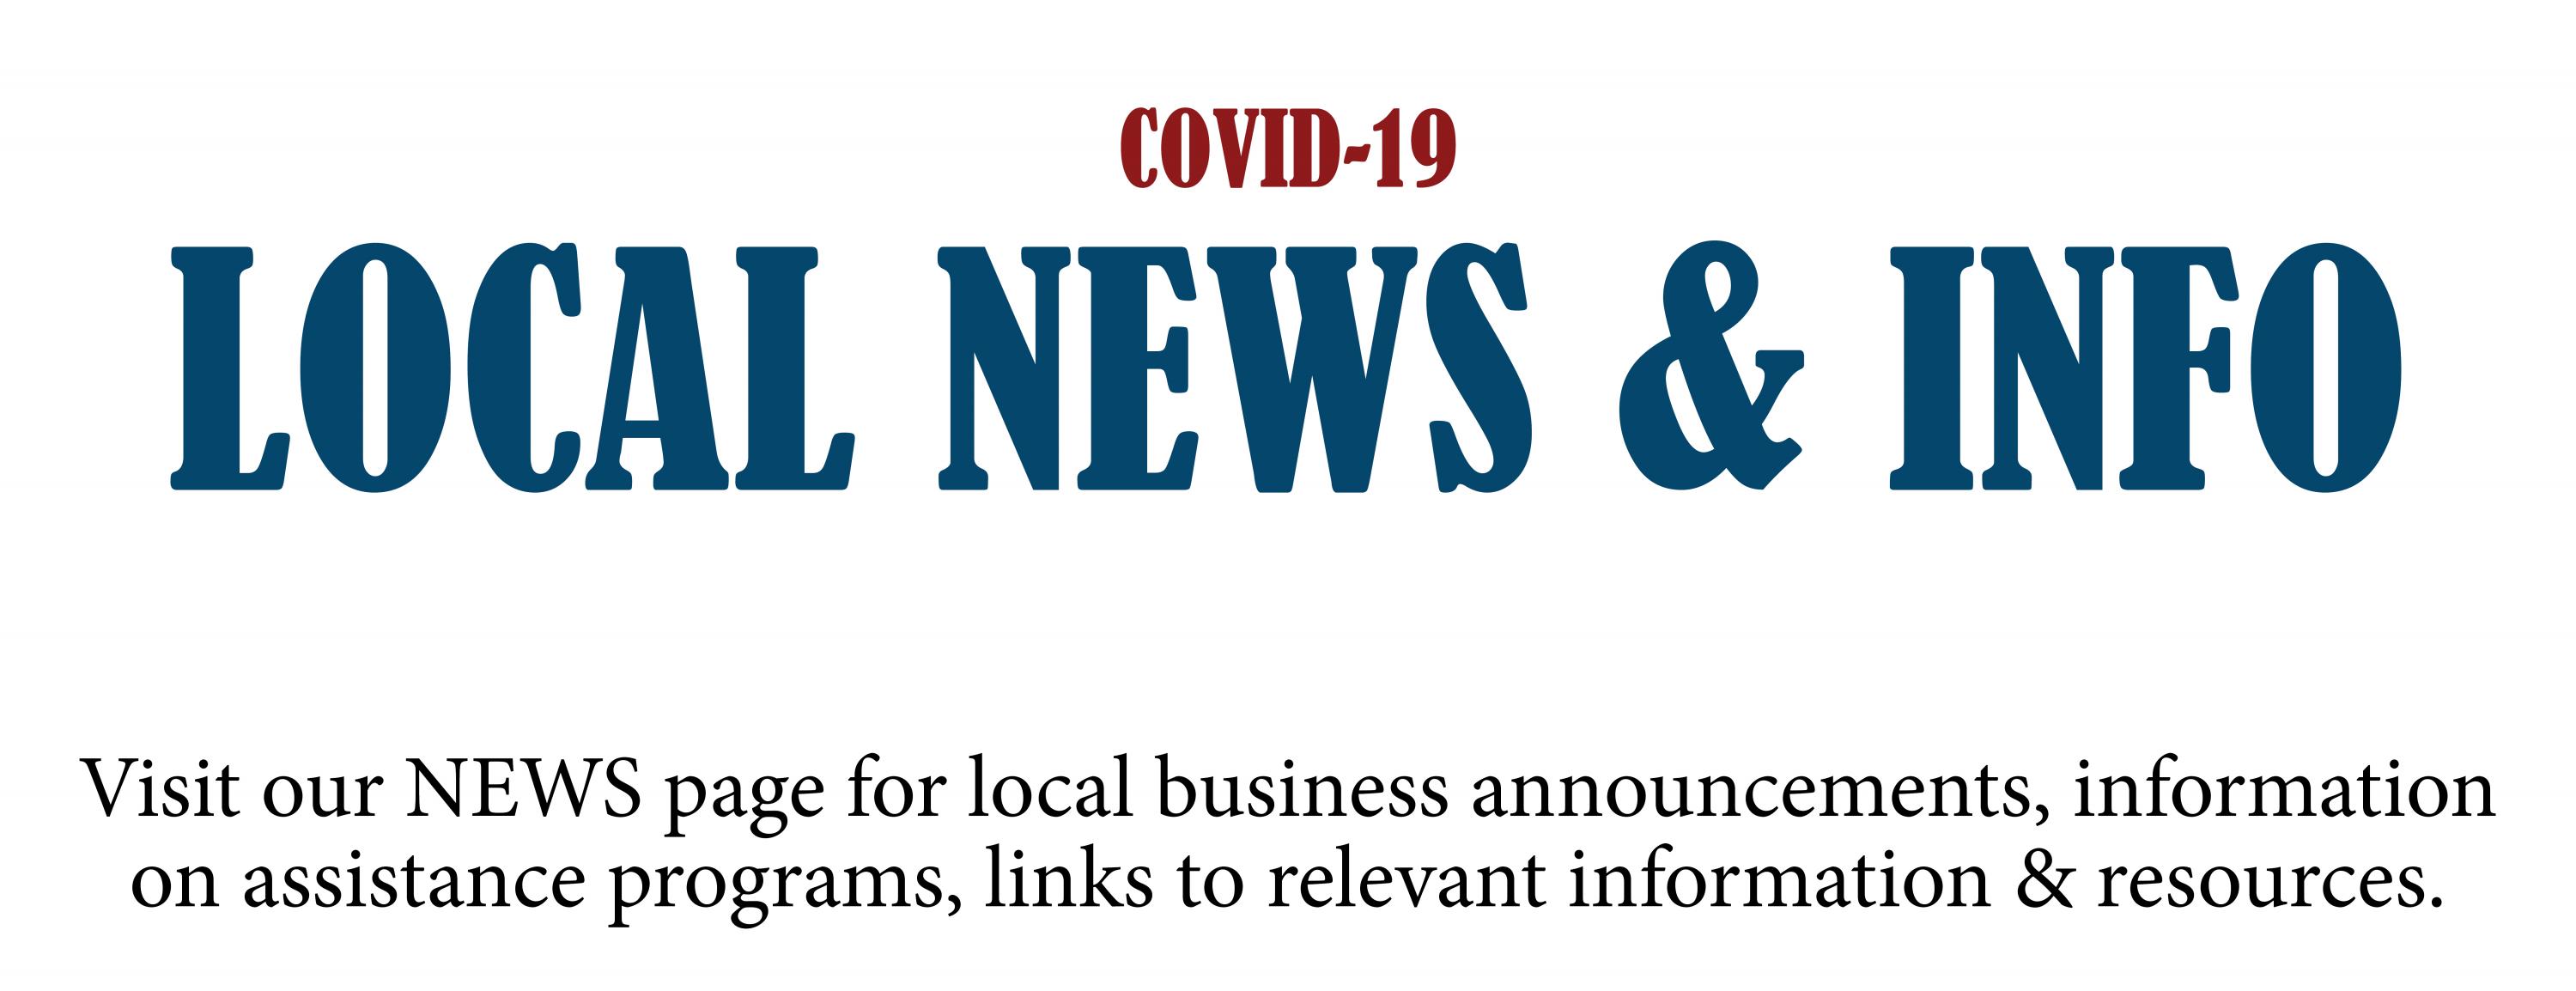 Visit the COVID-19 News & Info page on our Chamber site for the latest local updates Photo